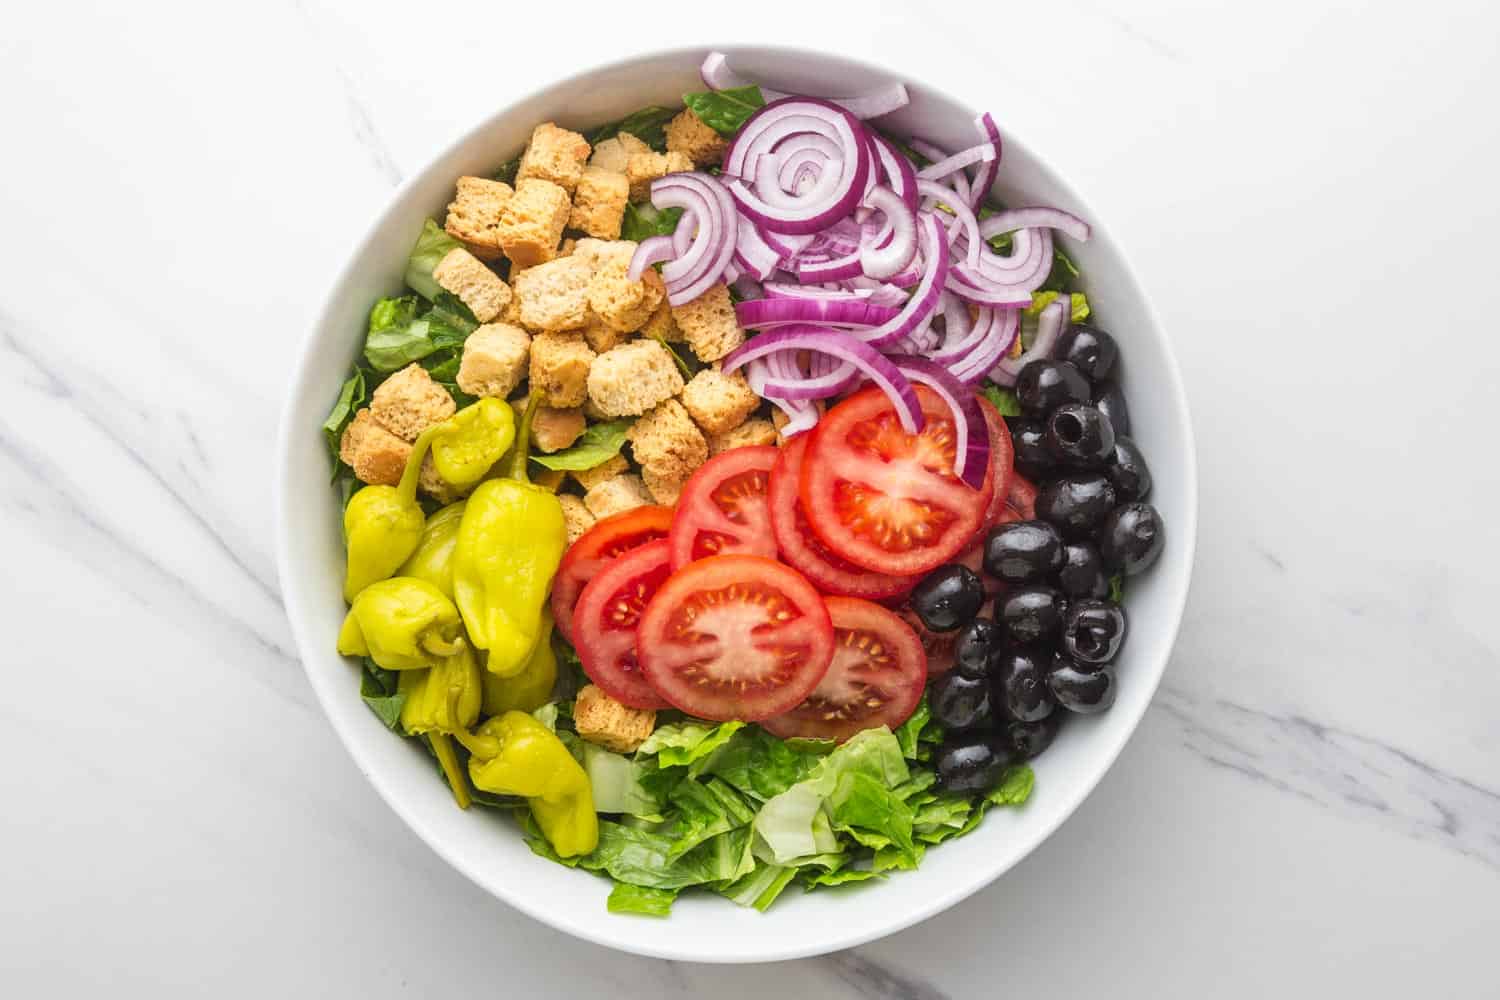 Overhead shot of olive garden's salad ingredients in a bowl before mixing